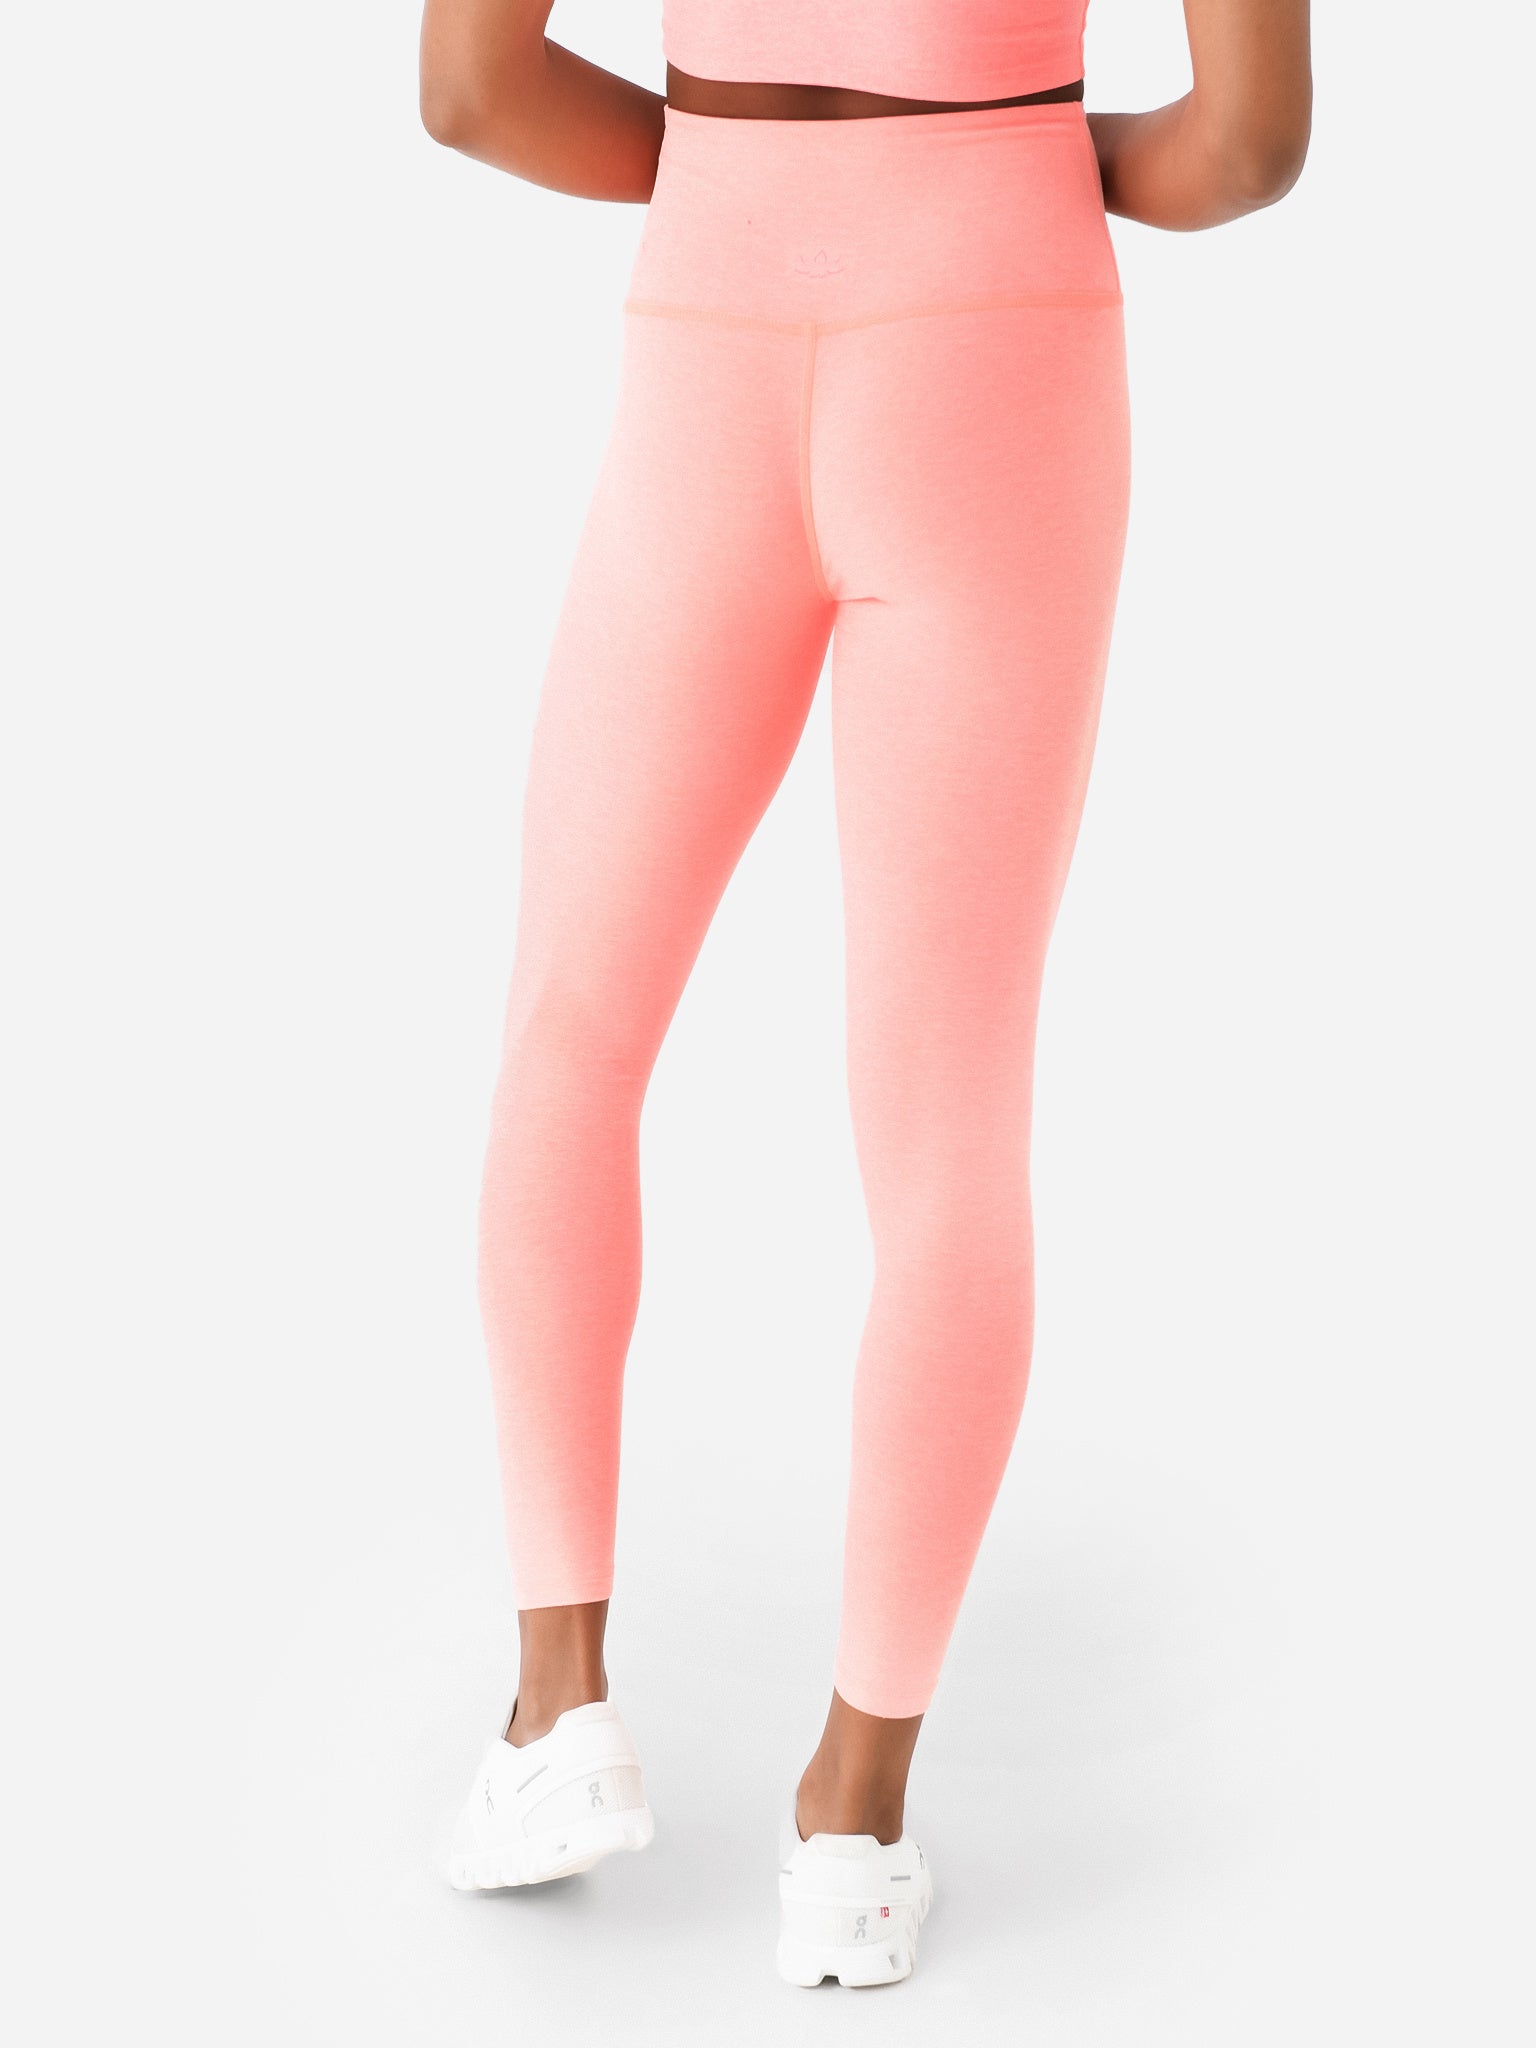 Spacedye Caught in the Midi High Waisted Legging - Pink Glo – Carbon38